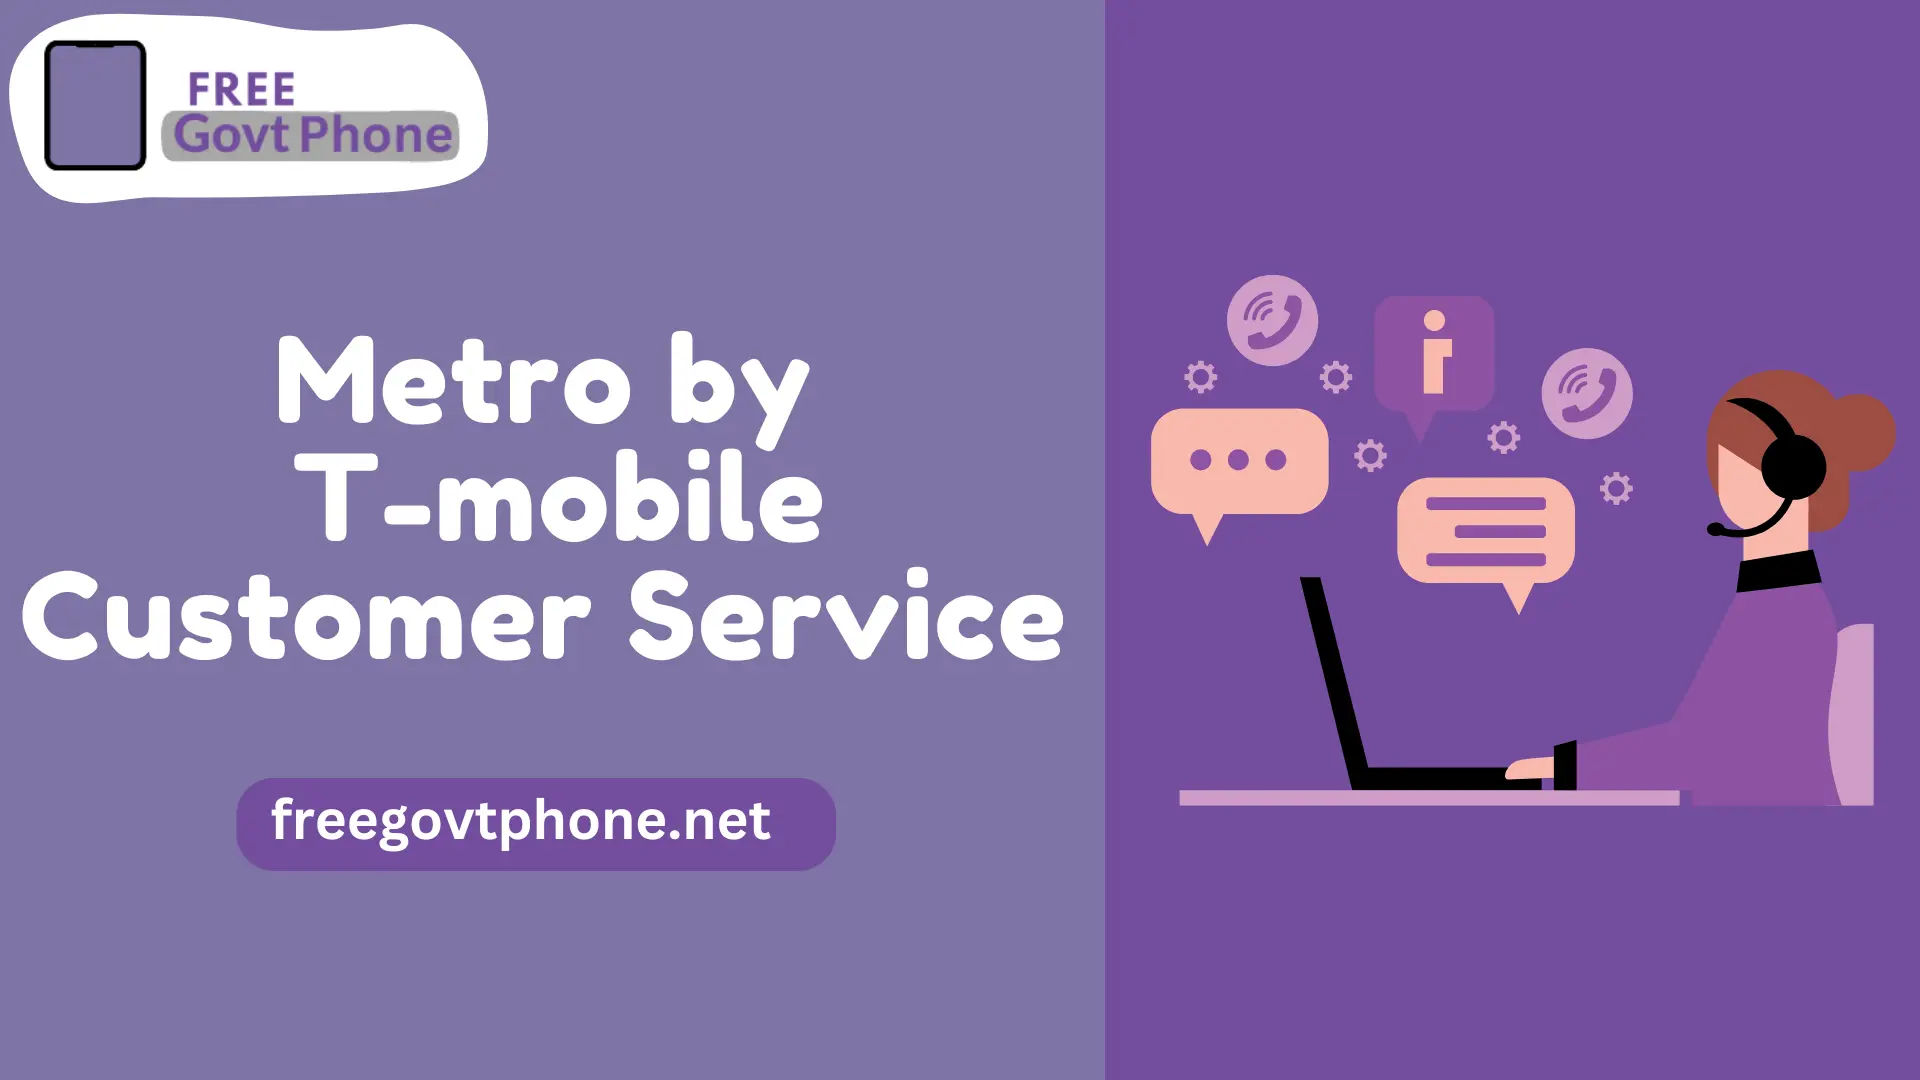 Metro by T-mobile Customer Service